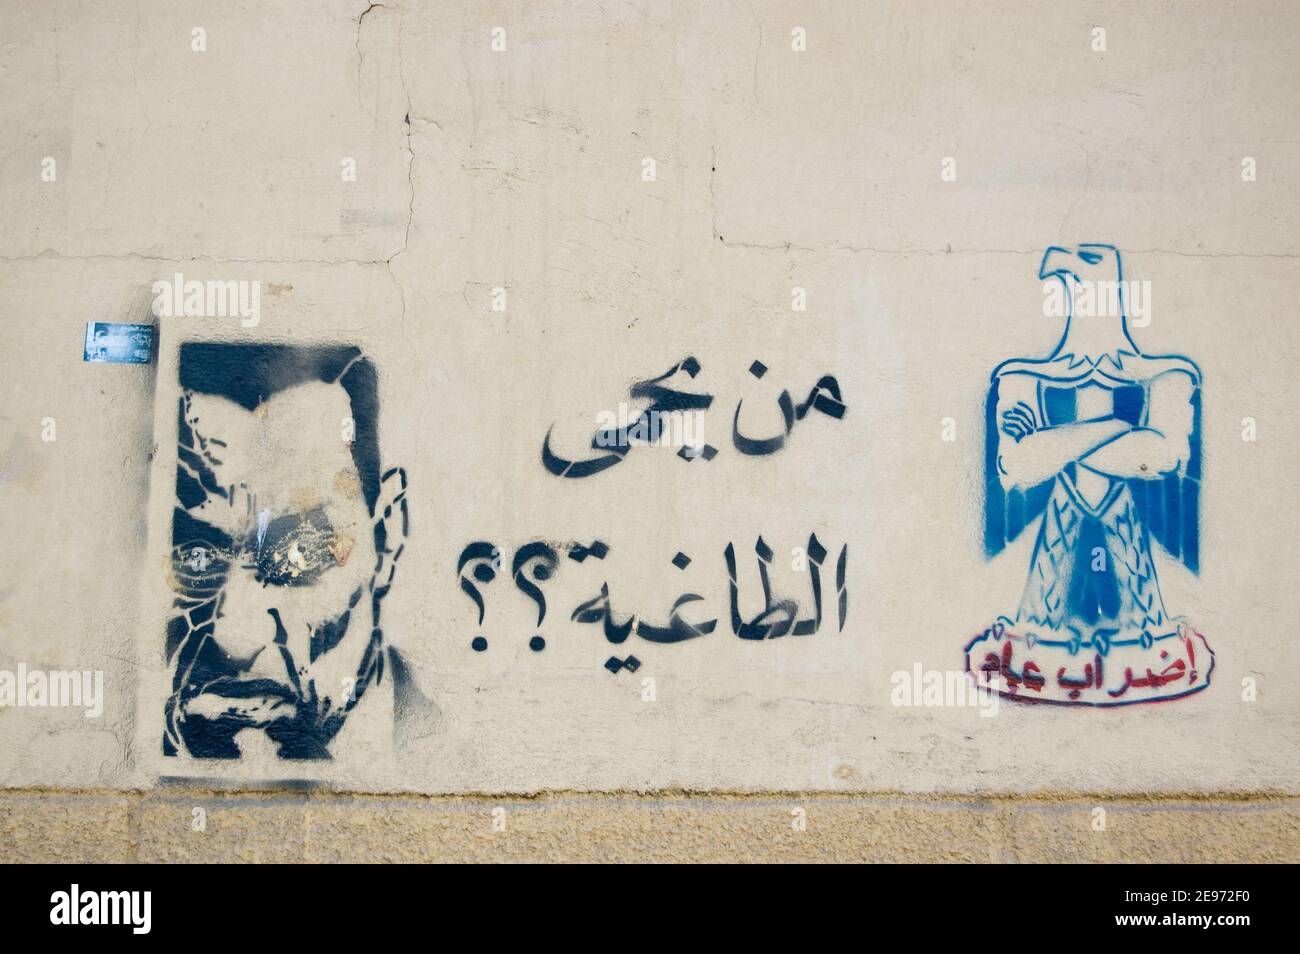 LUXOR, EGYPT - JANUARY 4: political graffiti on public wall painted by people supporting the revolutionary Arab Spring January 4 2012. The country is Stock Photo